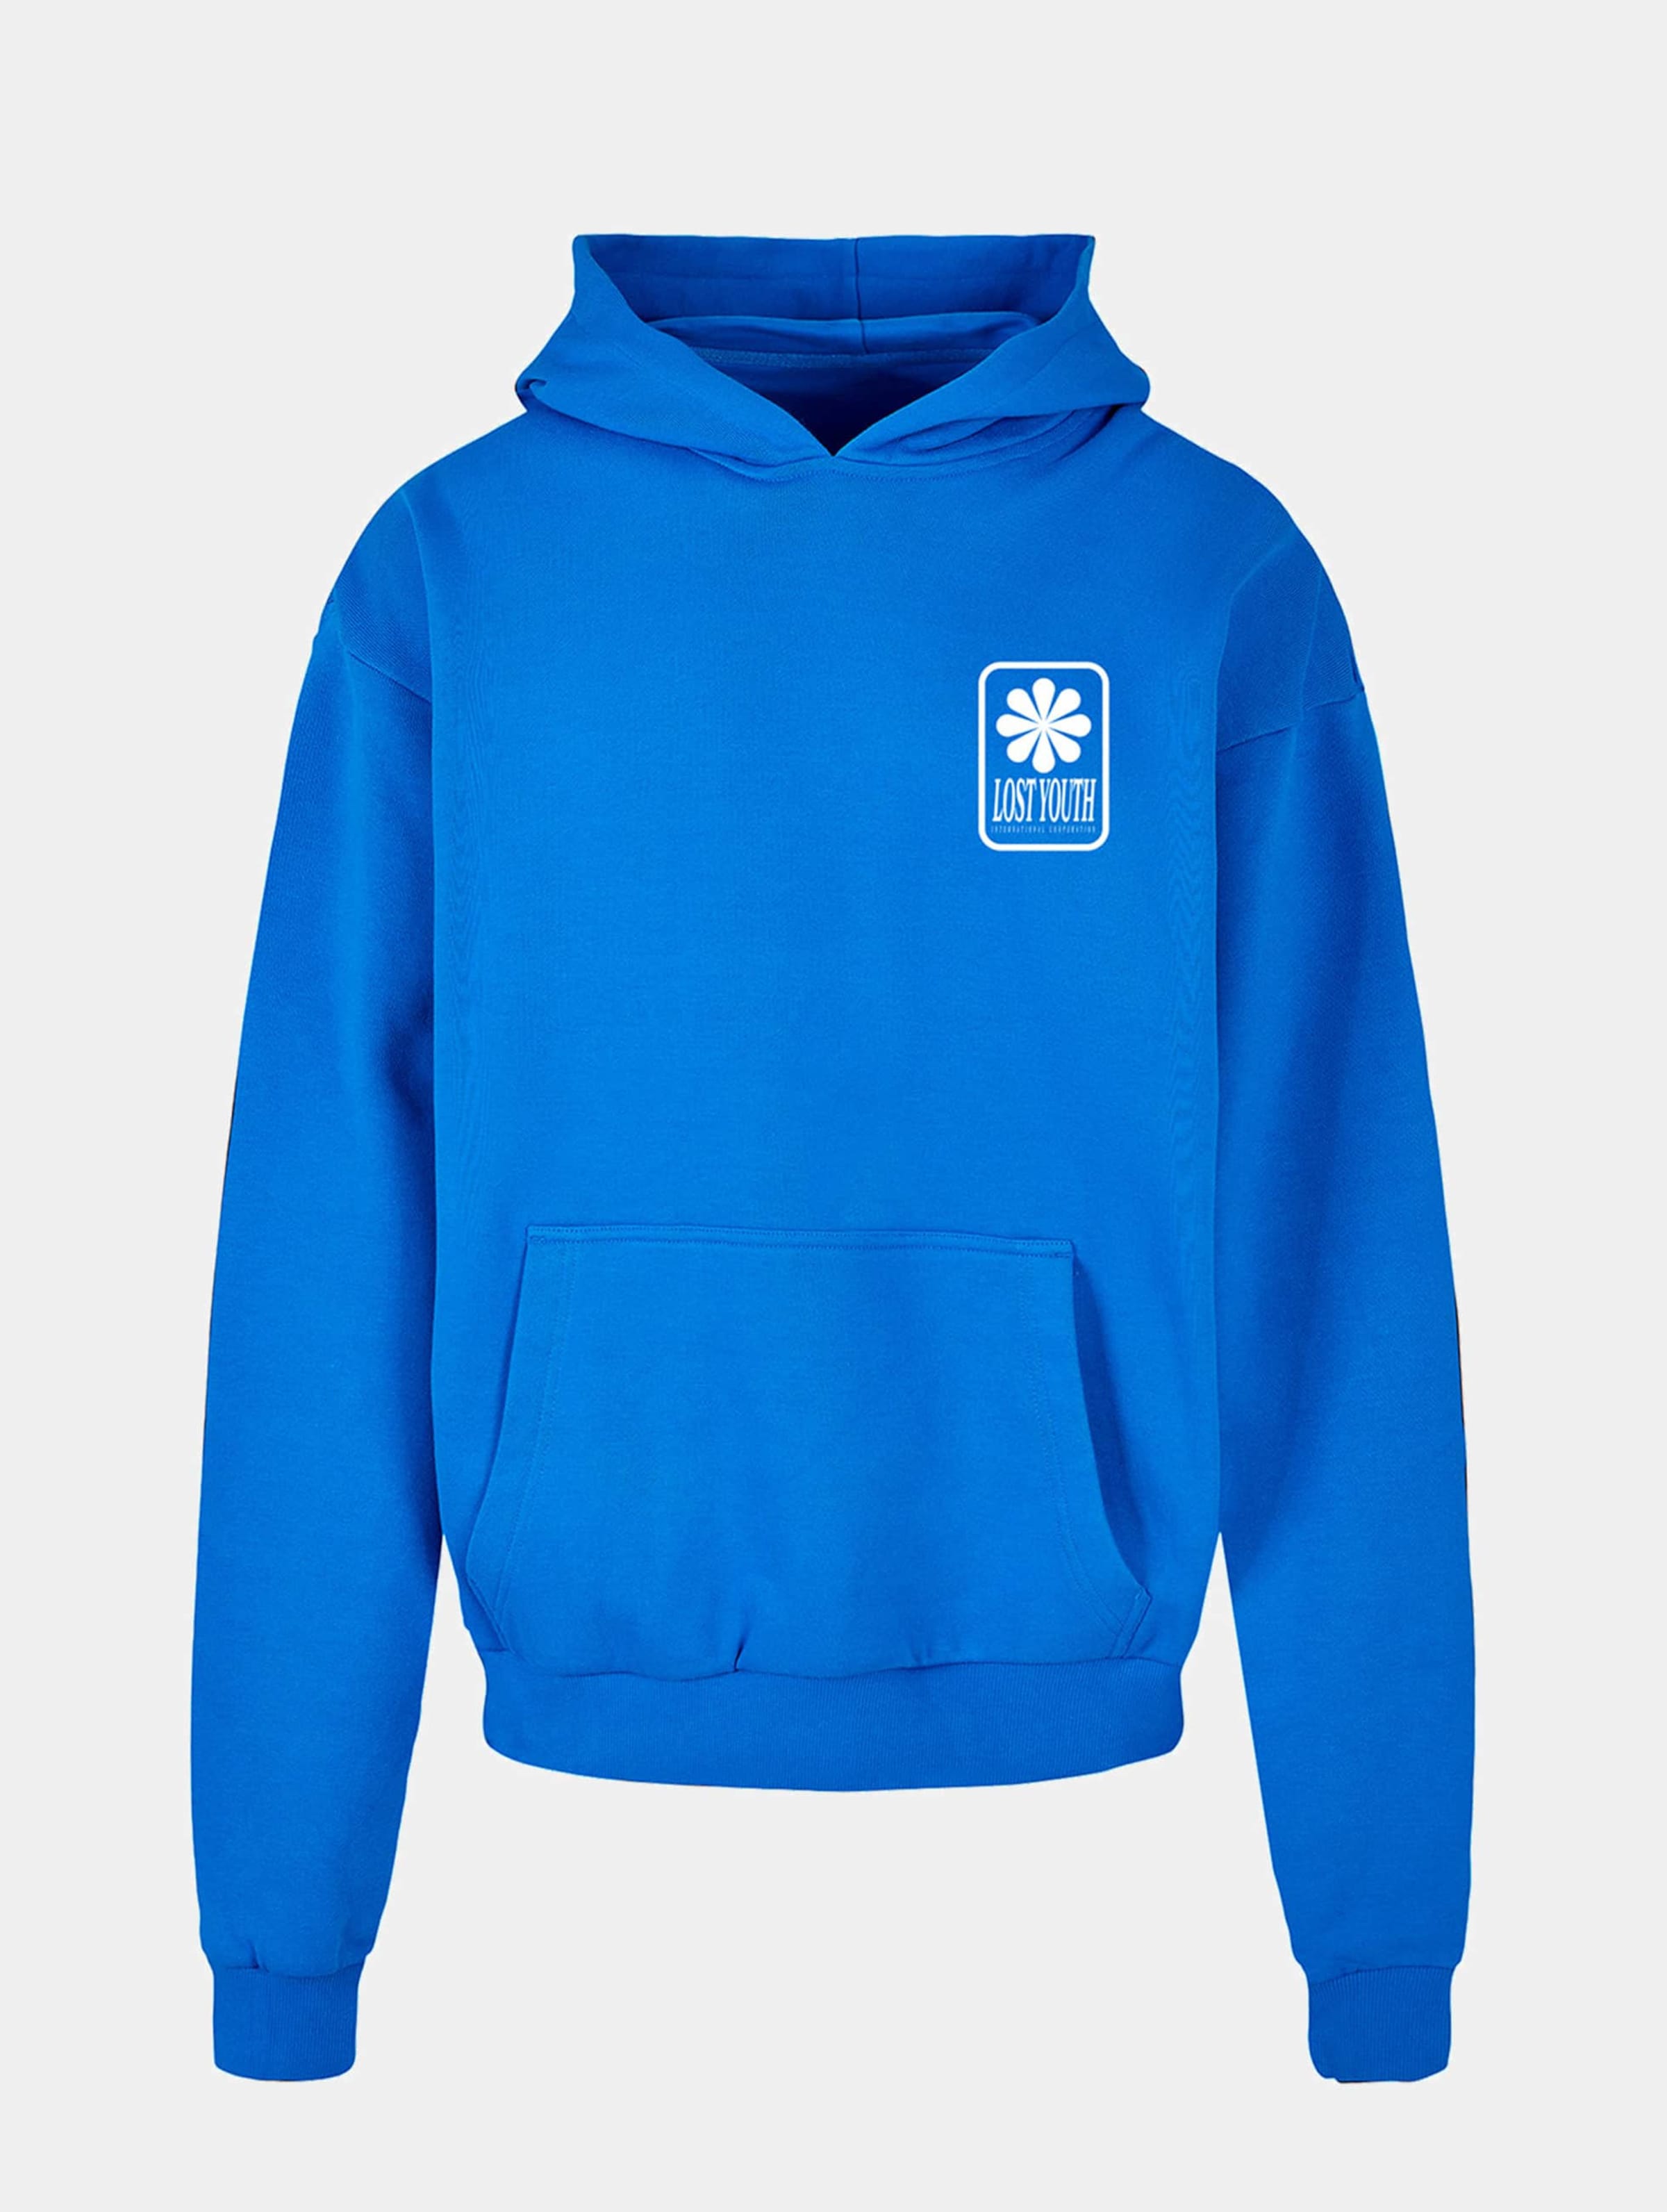 Lost Youth LY HOODY - ICON V.4 Mannen op kleur blauw, Maat 3XL